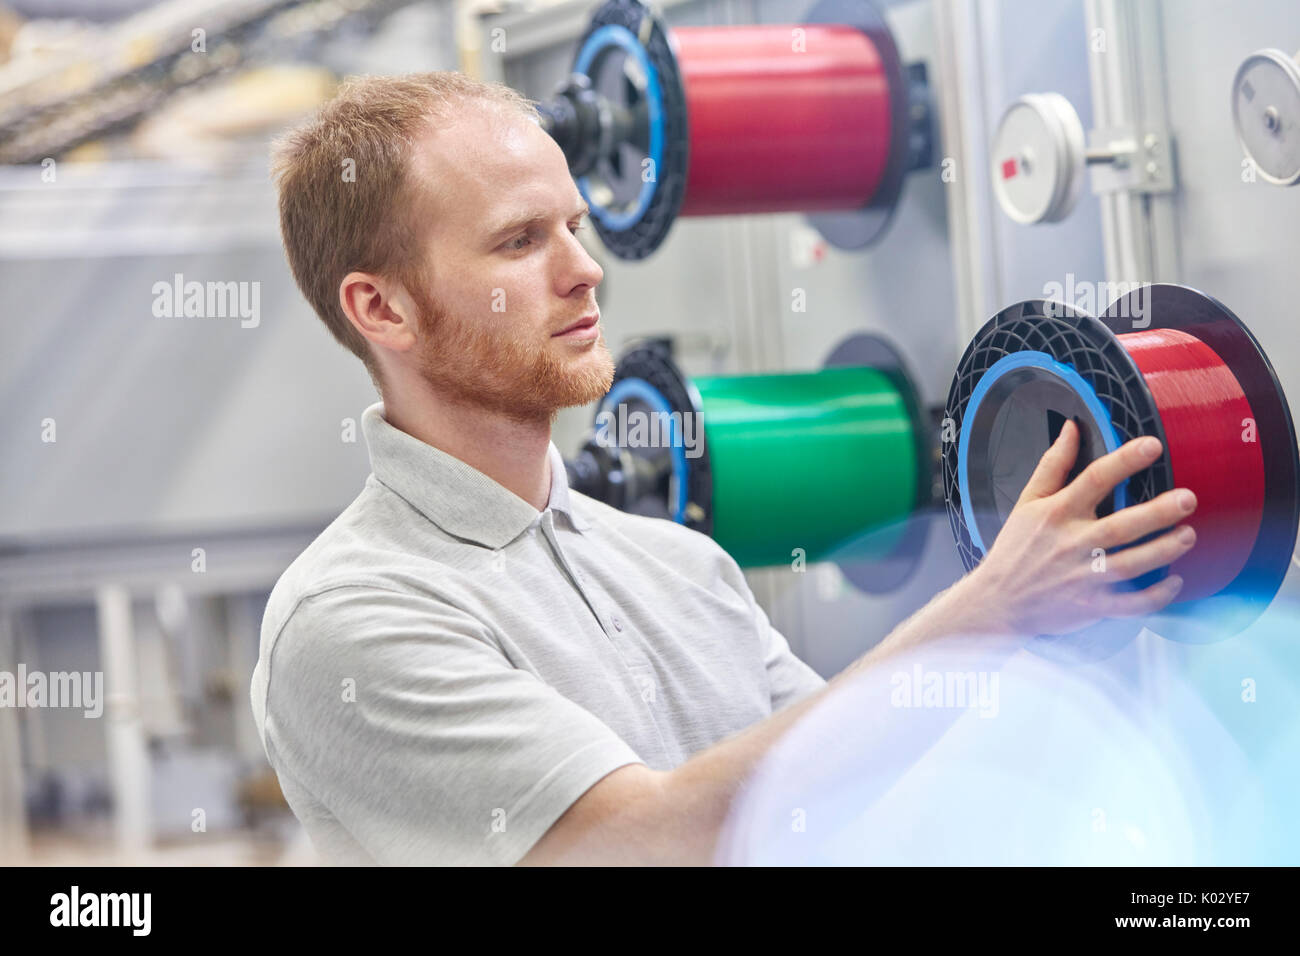 Male worker changing spool in fiber optics factory Stock Photo